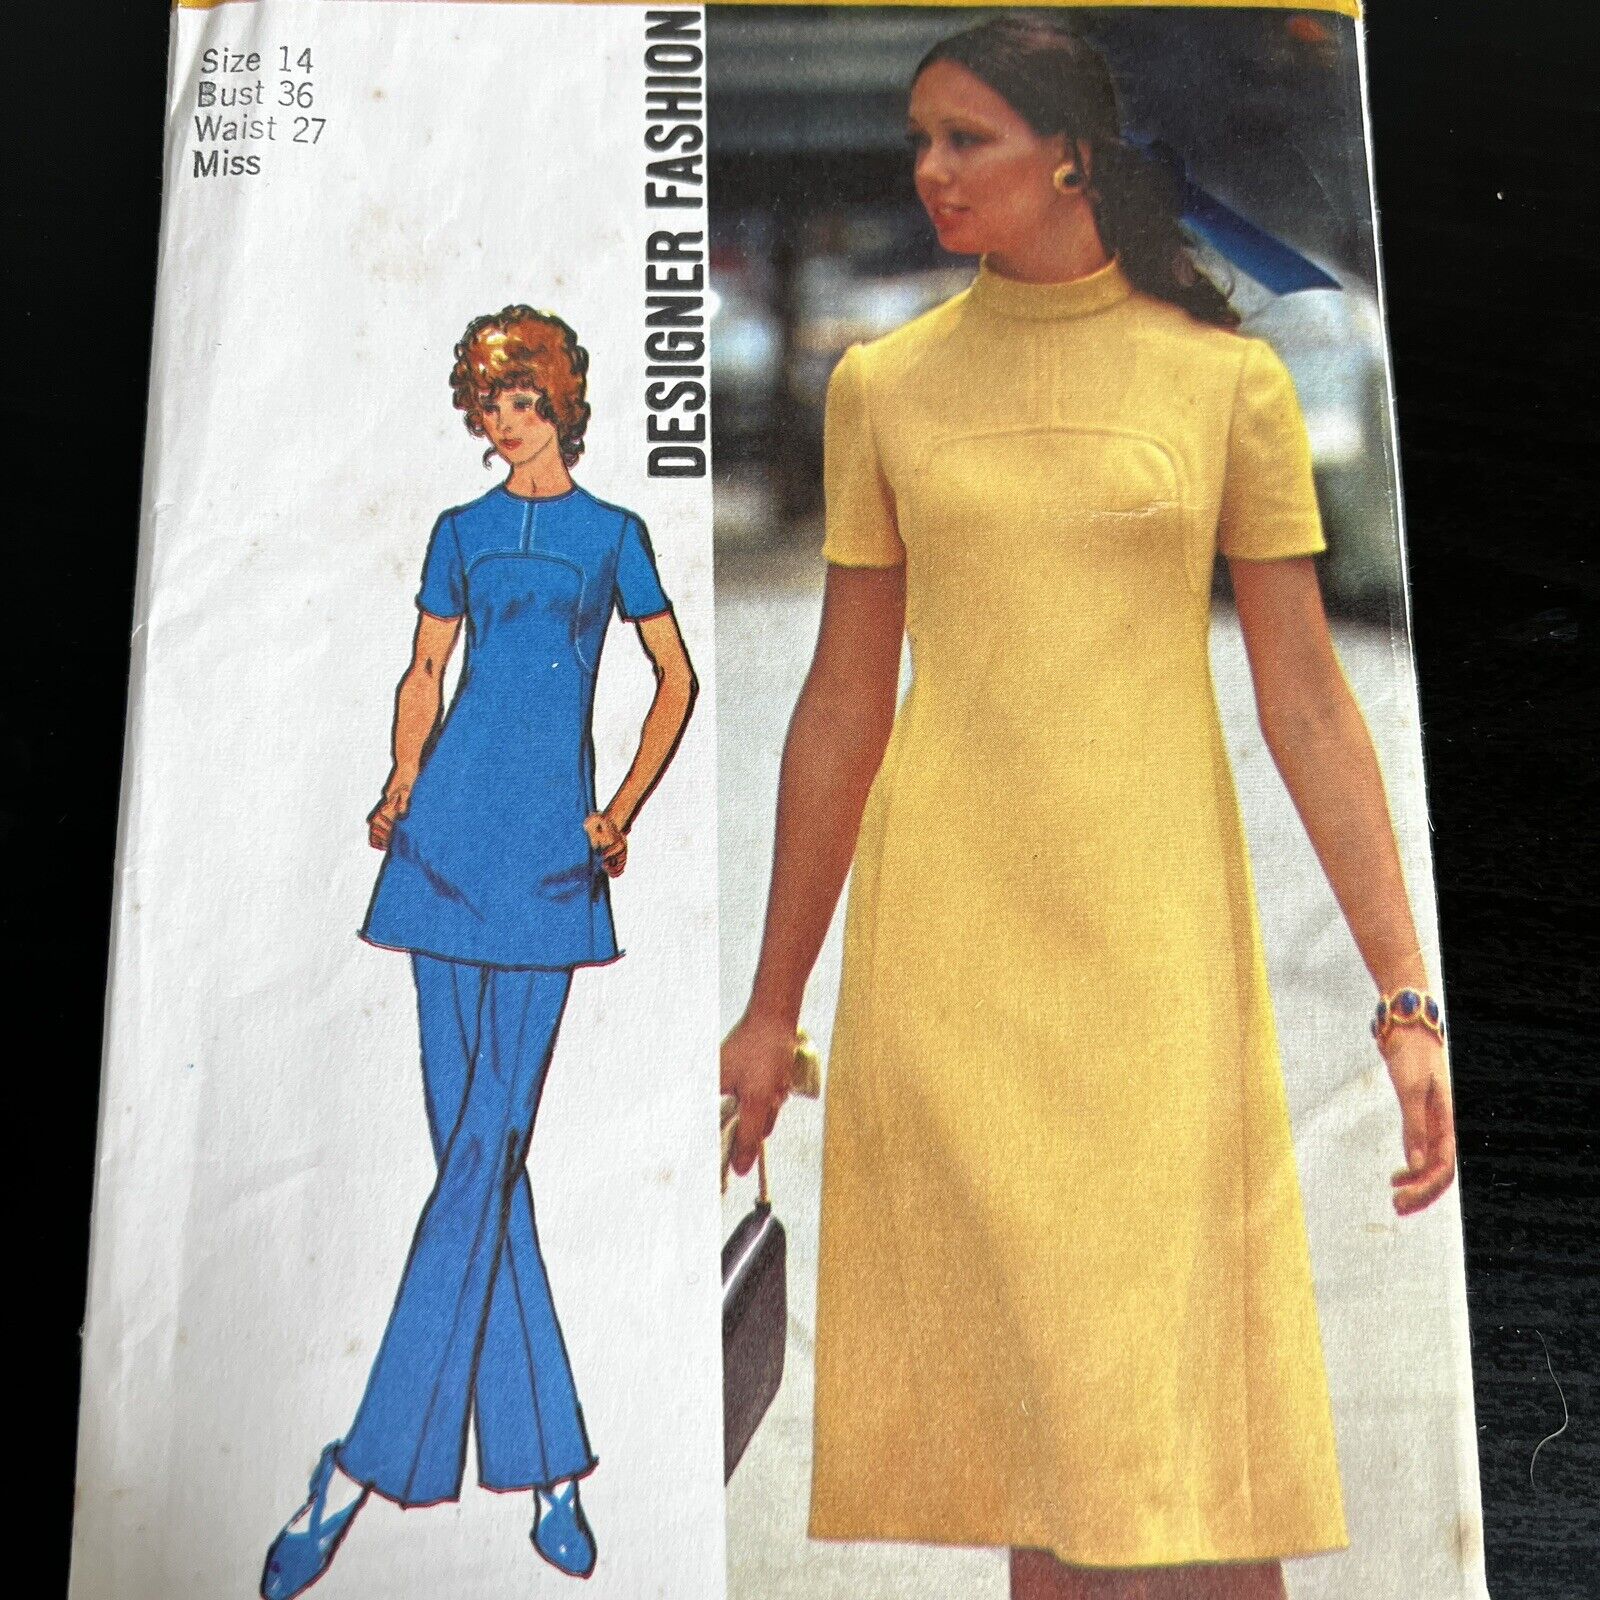 Vintage 1970s Simplicity 9761 Dress or Tunic + Pants Sewing Pattern 14 Small CUT